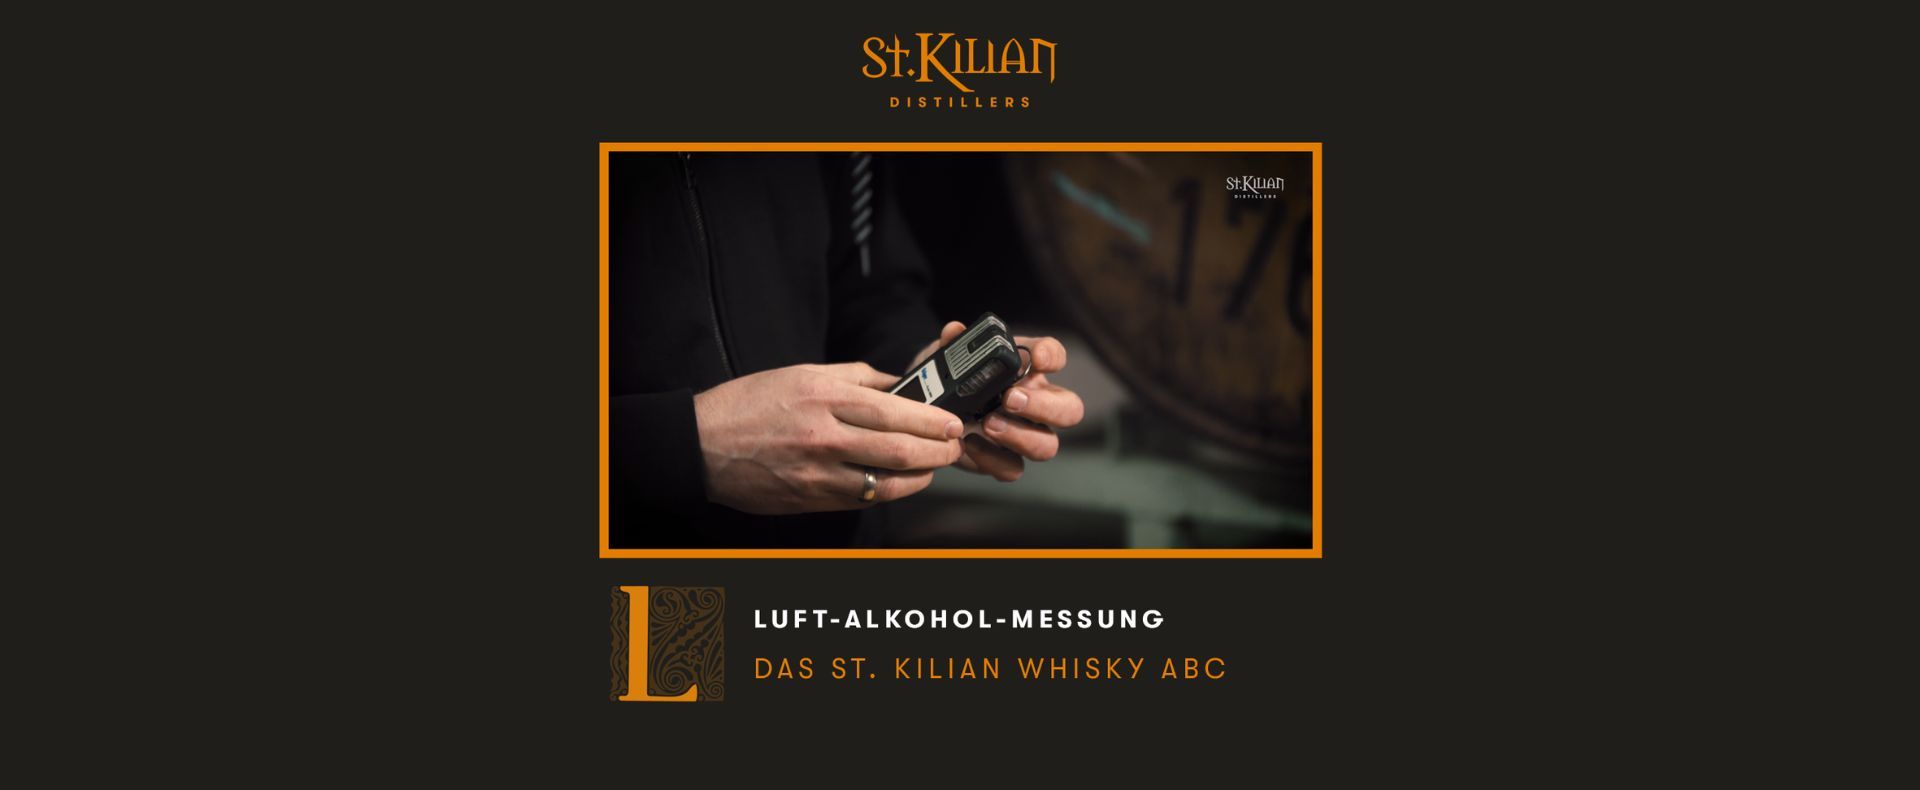 Whisky ABC - L as in air-alcohol measurement